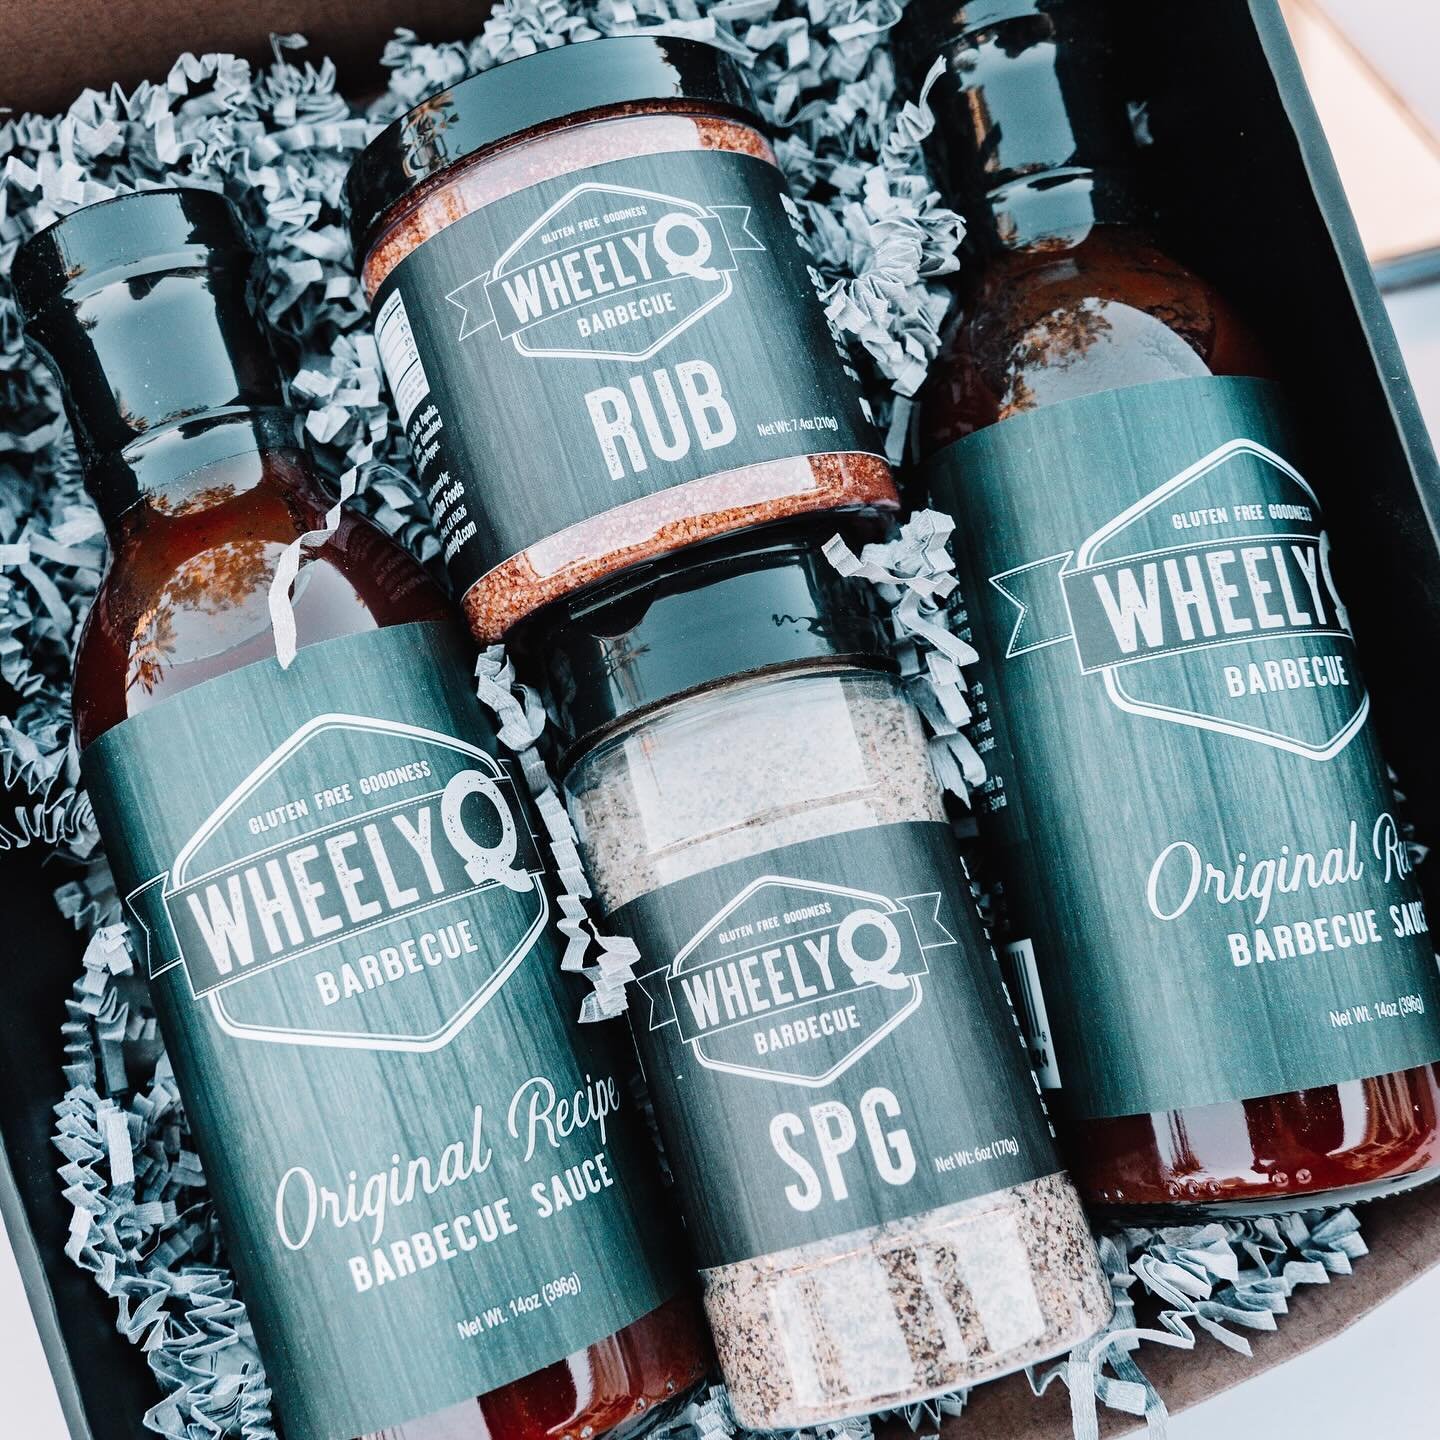 Don&rsquo;t be a Cotton-Headed Ninny Muggins and grab some of these gifts boxes for your friends and family!

$25 On Sale on our website!

www.WheelyQ.com (link in bio)

&hellip;&hellip;&hellip;&hellip;&hellip;&hellip;&hellip;&hellip;&hellip;&hellip;